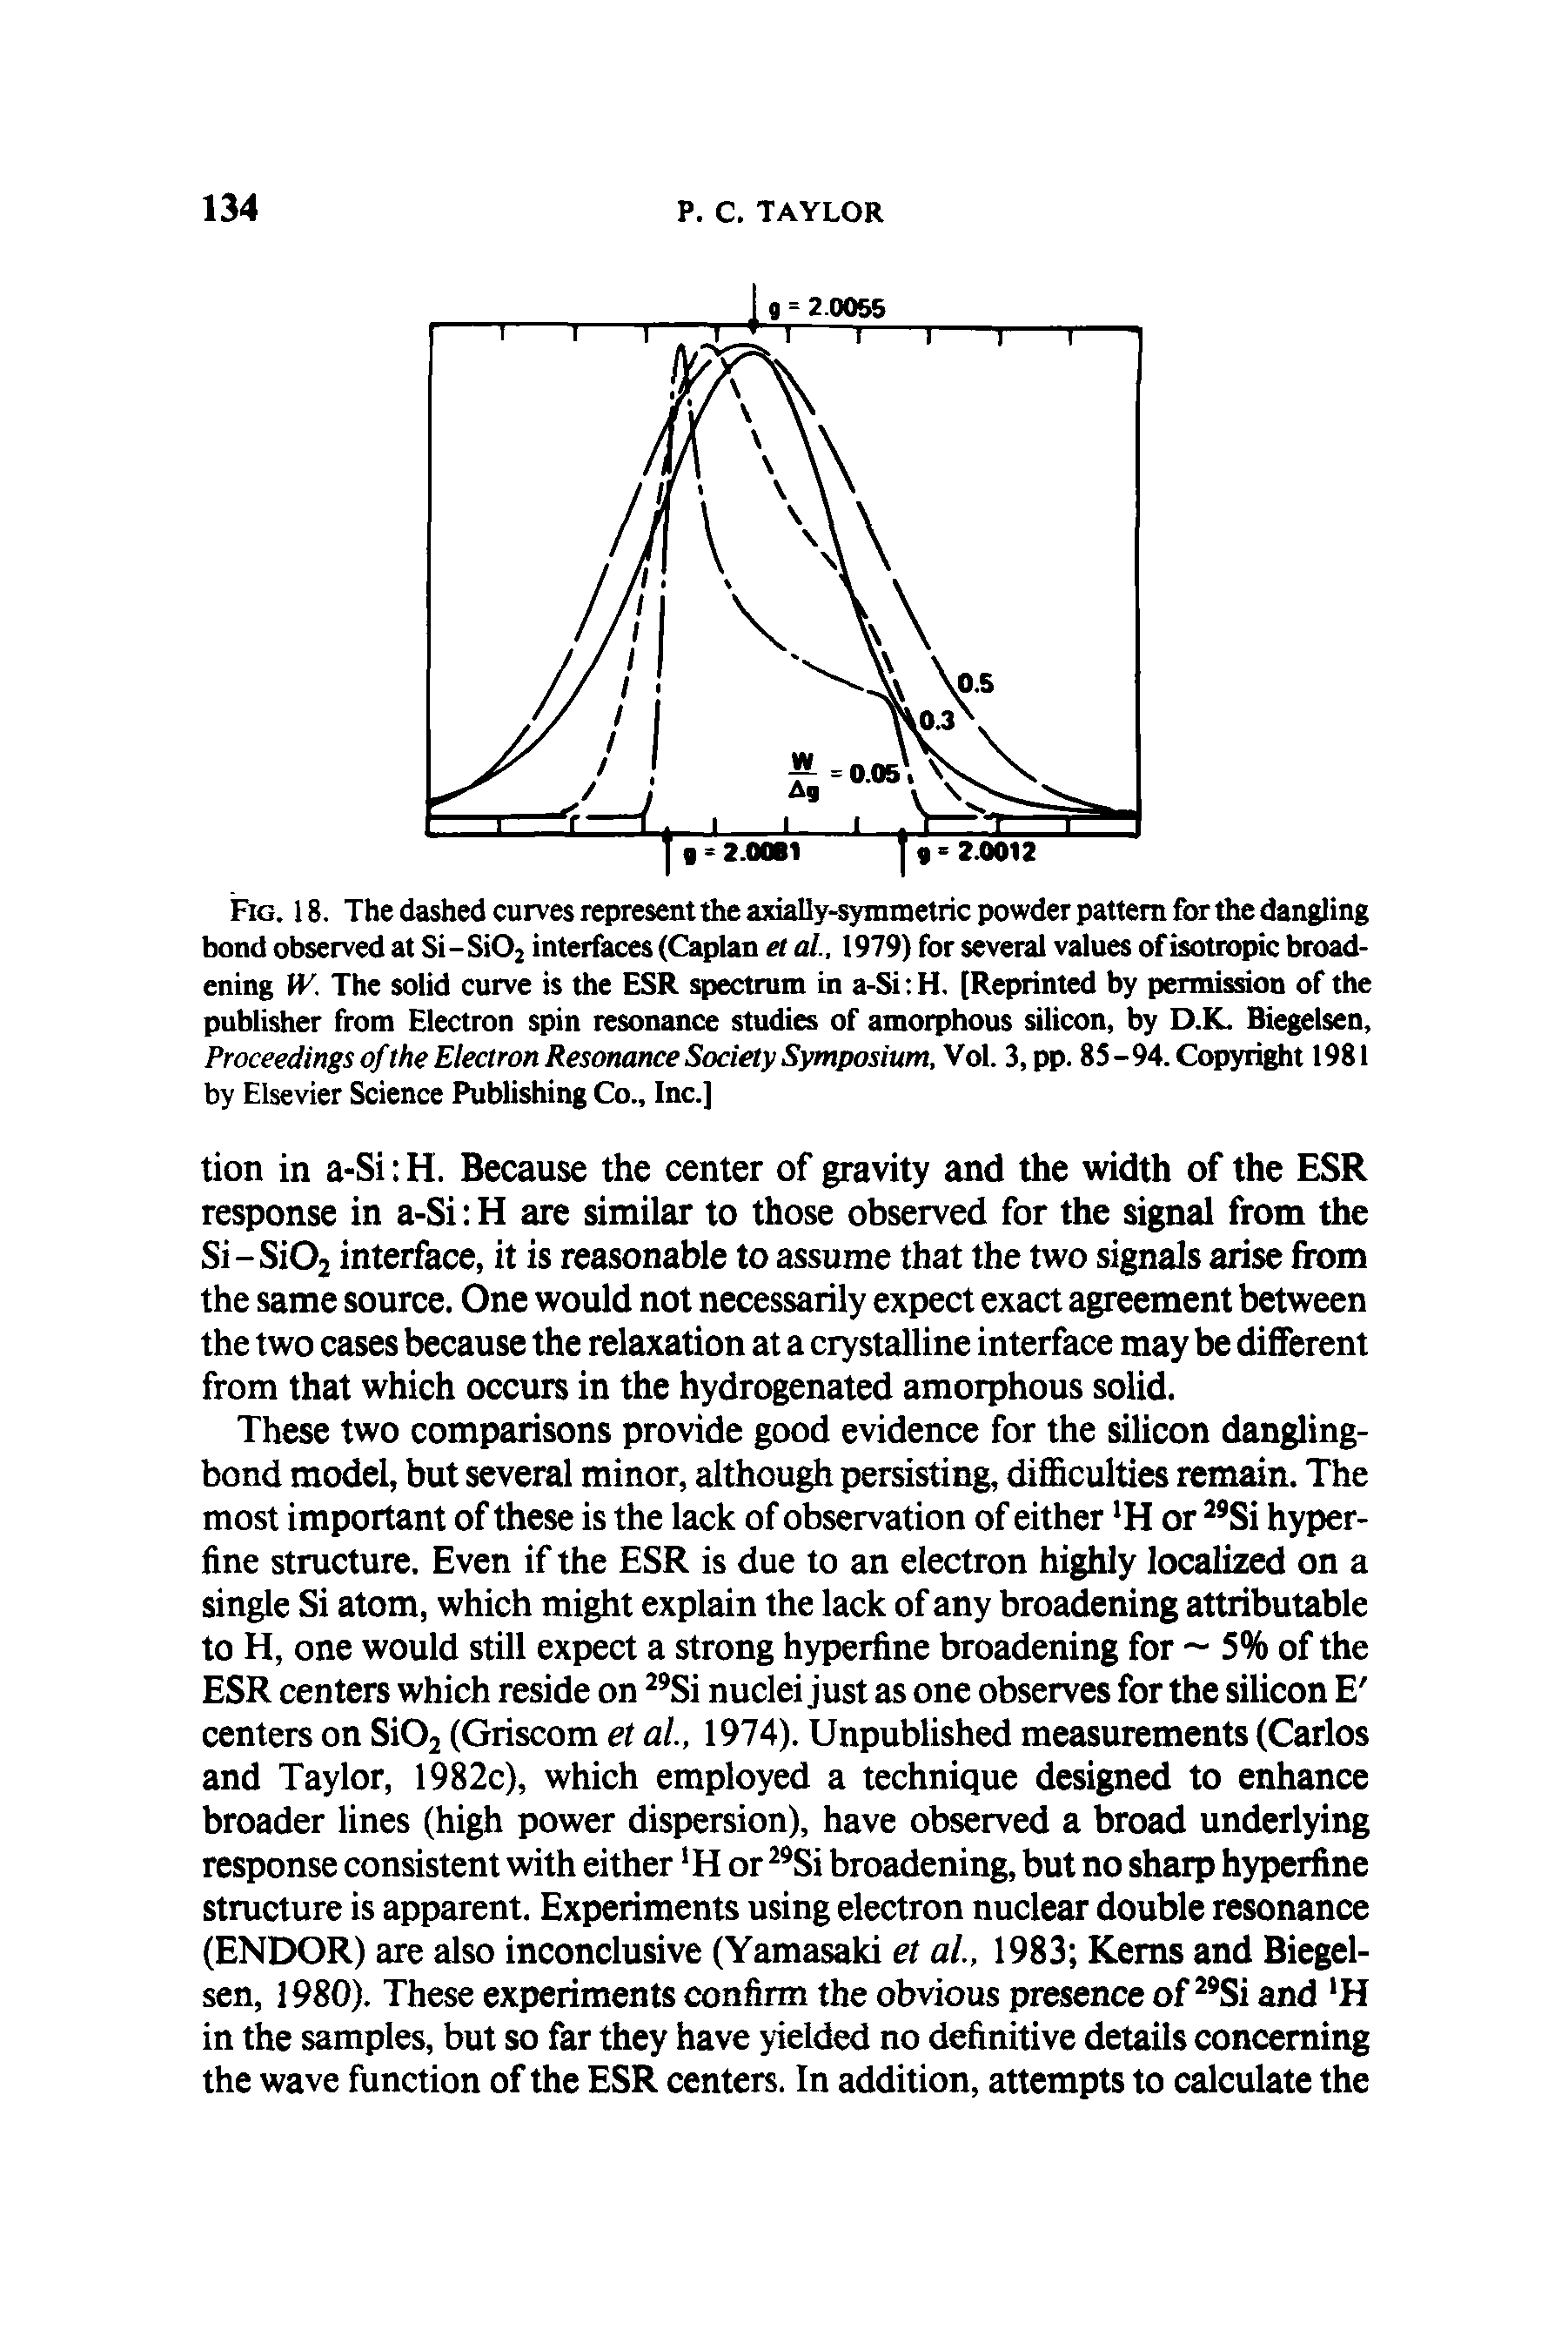 Fig. 18. The dashed curves represent the axially-symmetric powder pattern for the dangling bond observed at Si-SiOj interfaces (Caplan et al 1979) for several values of isotropic broadening W. The solid curve is the ESR spectrum in a-Si H. [Reprinted by permission of the publisher from Electron spin resonance studies of amorphous silicon, by D.K. Biegelsen, Proceedings of the Electron Resonance Society Symposium, Vol. 3, pp. 85 - 94. Copyright 1981 by Elsevier Science Publishing Co., Inc.]...